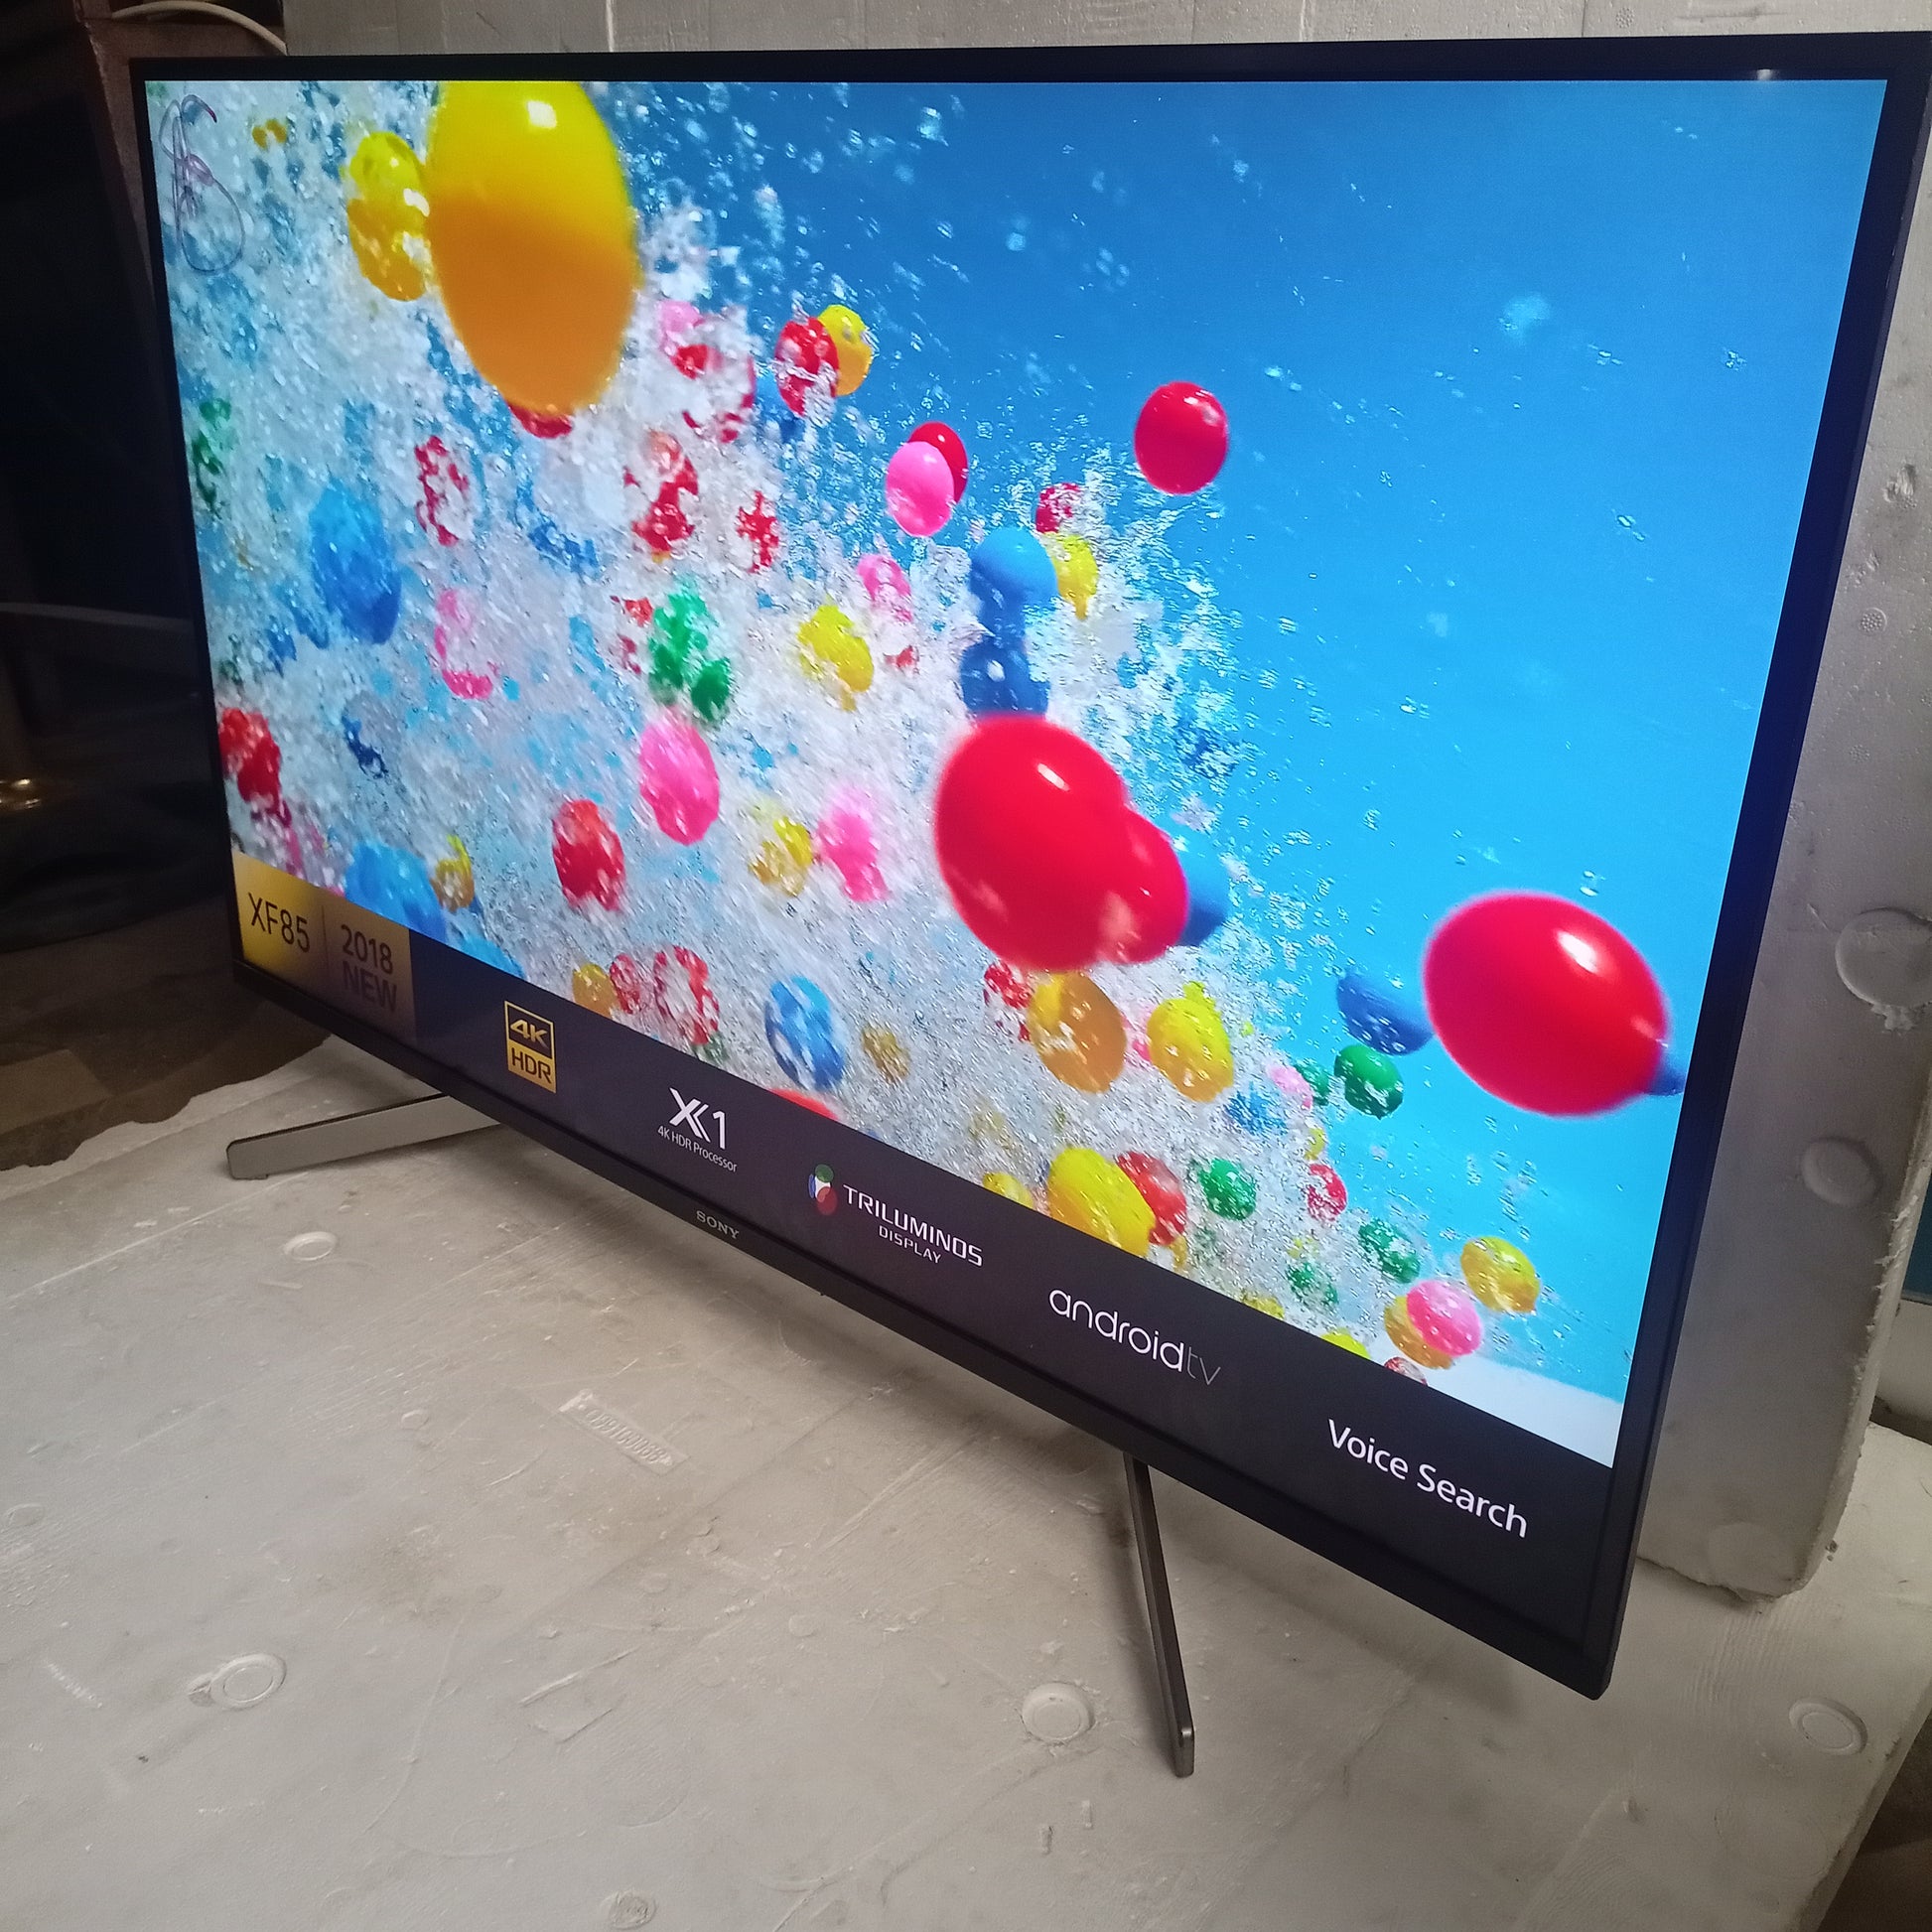 Sony BRAVIA 43 Inch KD-43XF8505 Android Smart 4K UHD HDR10 TV + XPro Engine - Foreign Used